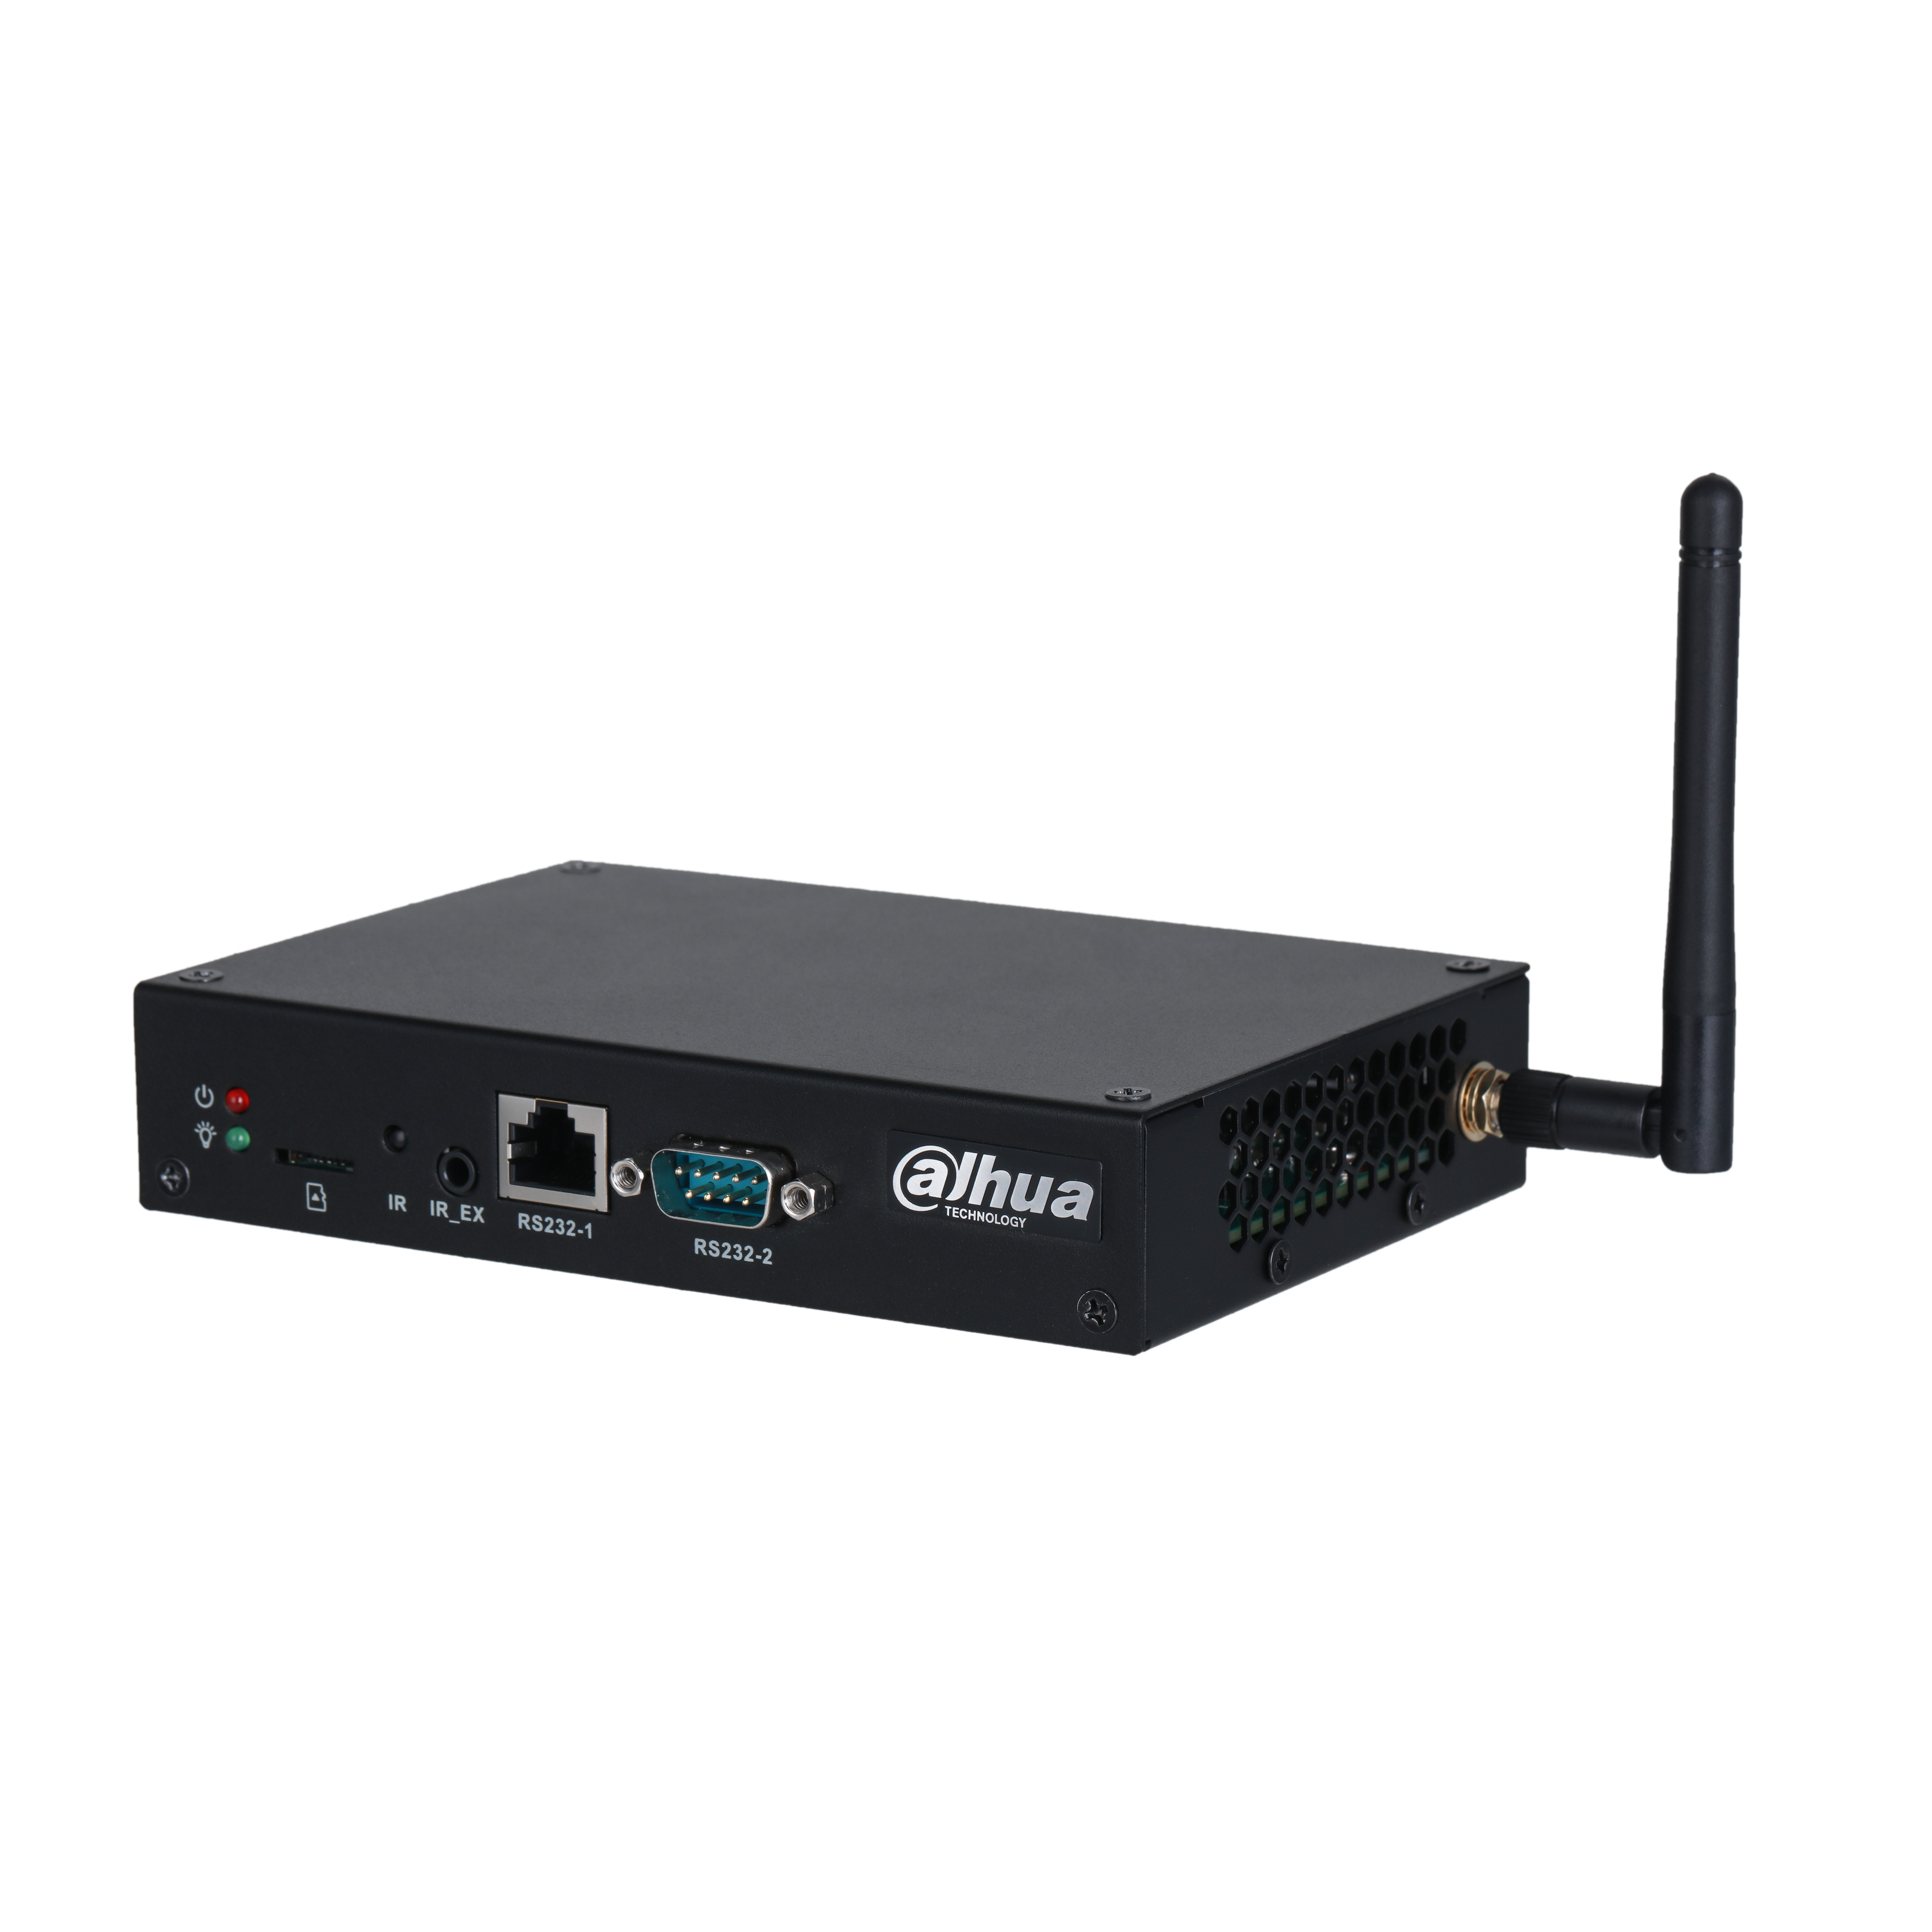 DHI-DS04-AI400 MEDIA PLAYER BOX BLK 1CH H265 4K@60/2CH H264 4K@25/2CH HDMI?1,USBx2 SD CARDx1 A/O 1 WIFI/IP(2.4G ONLY) DESKTOP MTD 12VDC *ANDROID ONLY MPS PLATFROM REQUIRED*